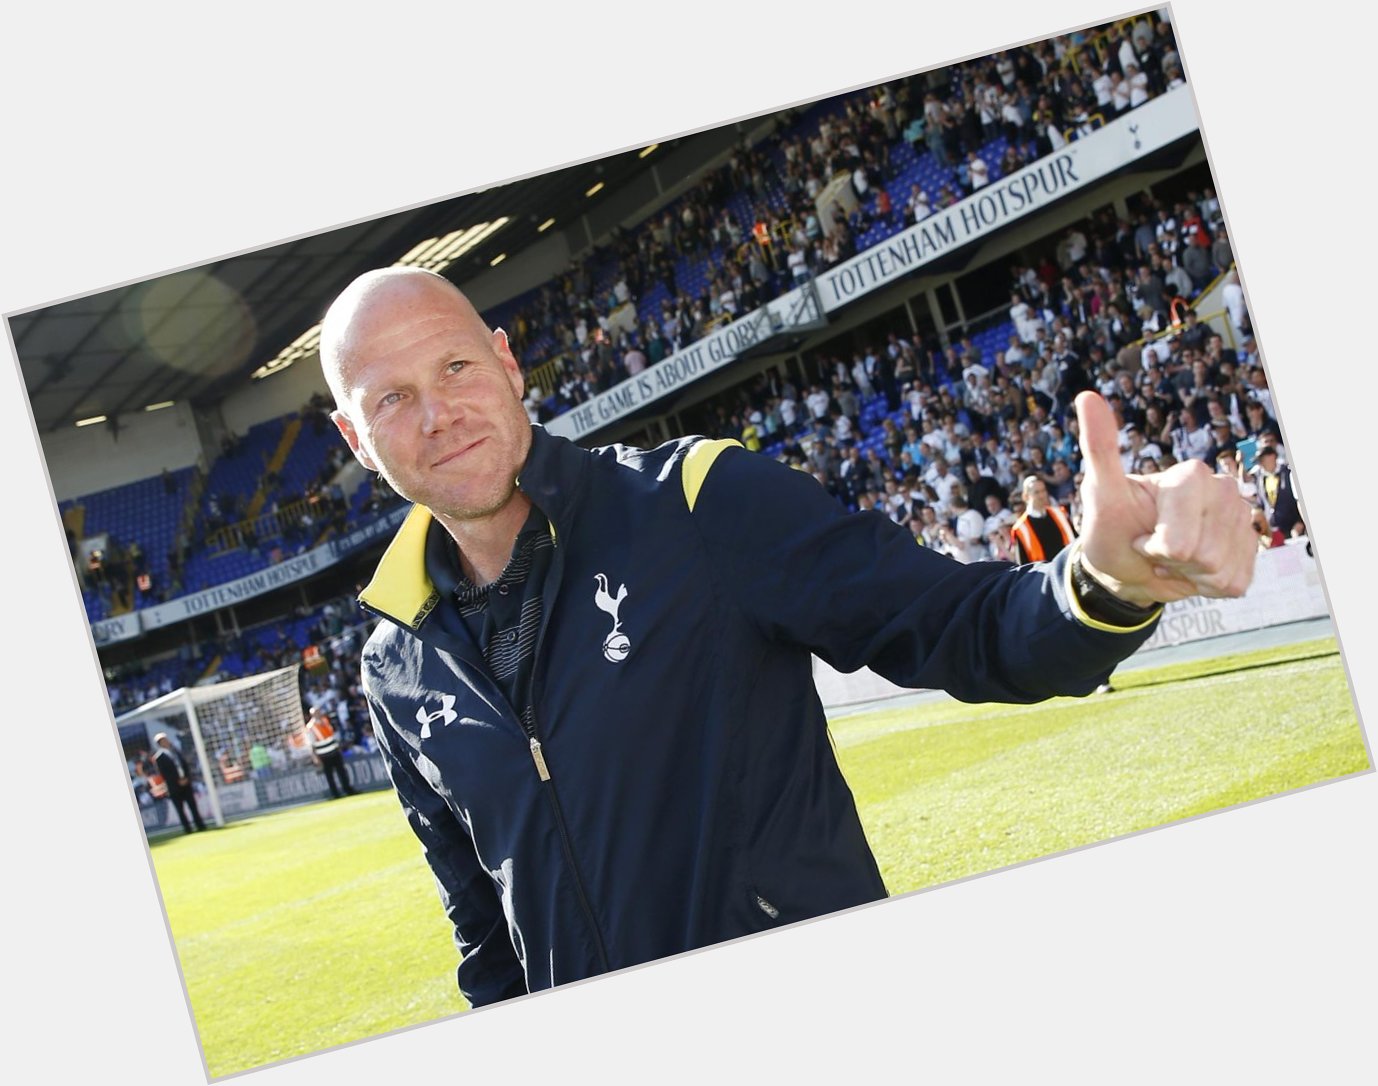 Happy 44th(!) birthday to goalkeeper Brad Friedel. 

Premier League matches: 450
Premier League clean sheets: 132 